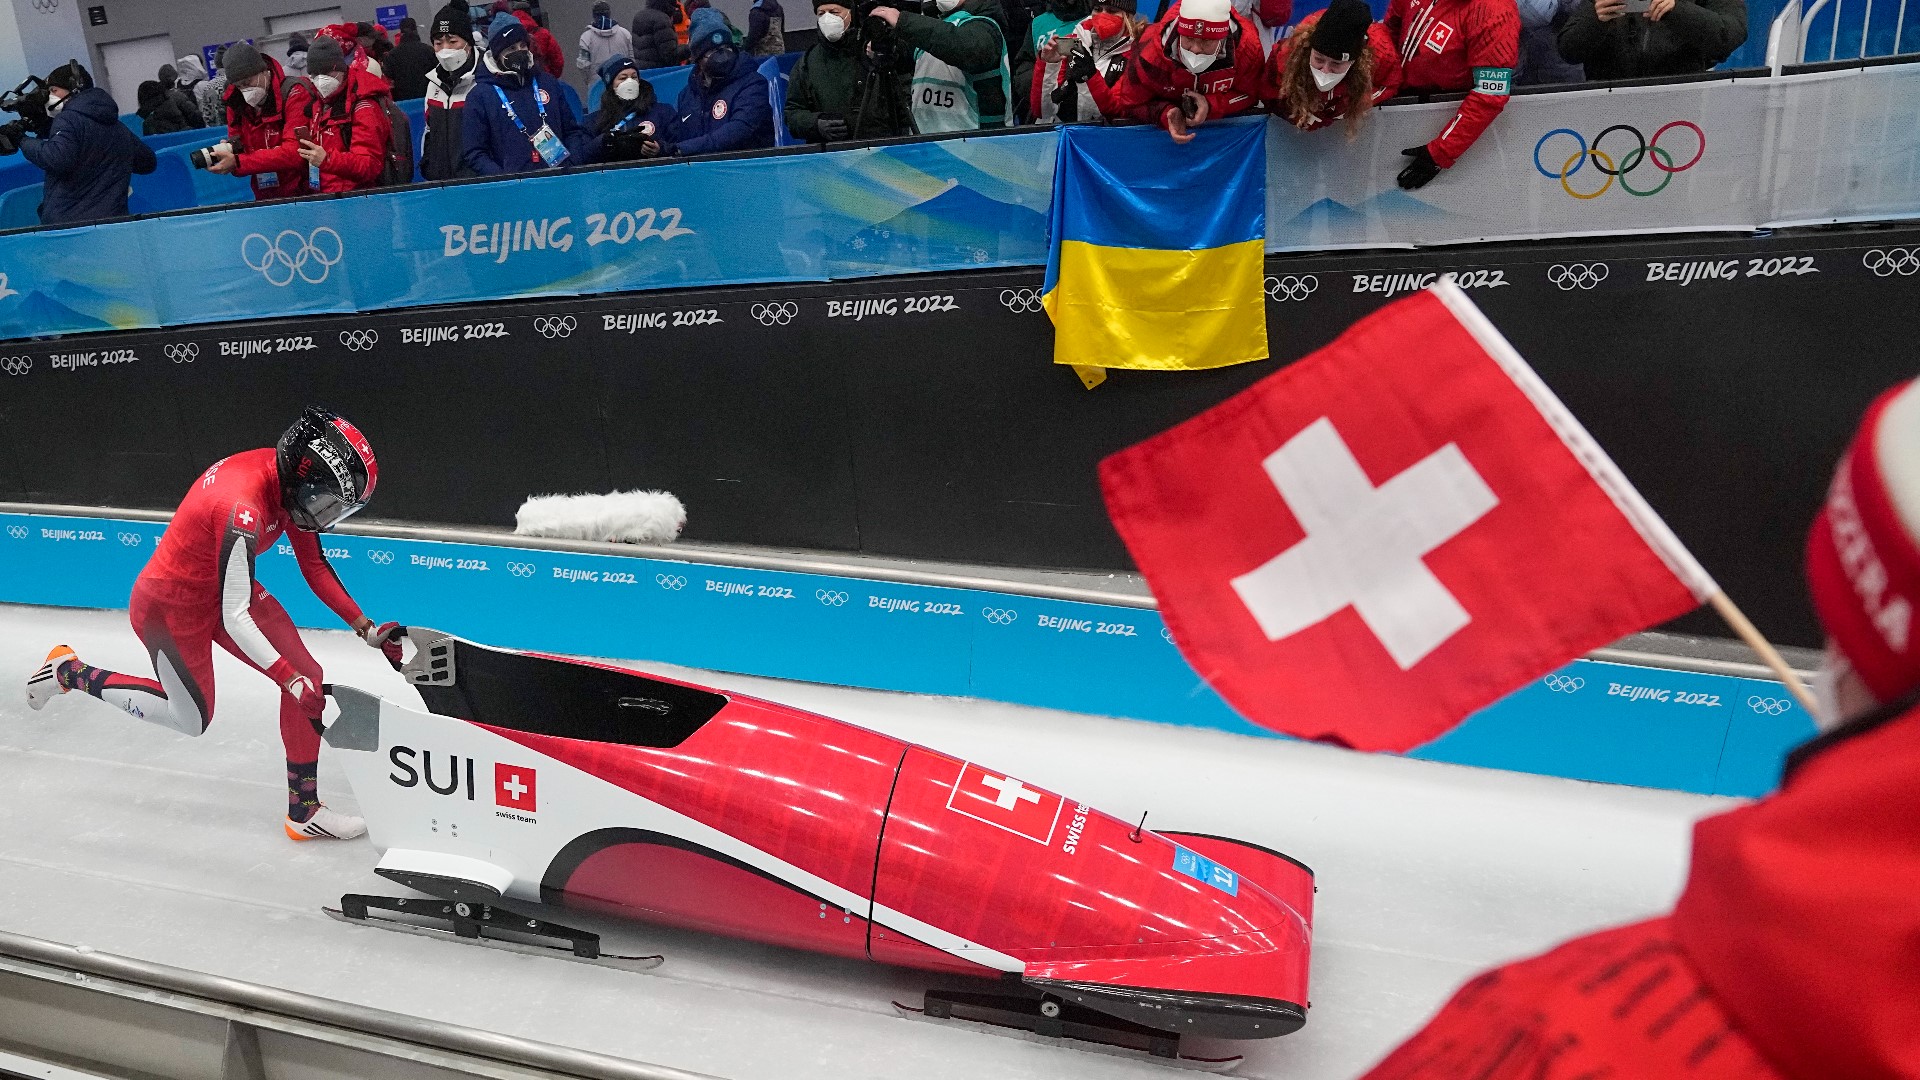 Historically there had only been three bobsledding events at the Winter Olympics - the two-man and four-man sledding events, and the two-woman sledding event.